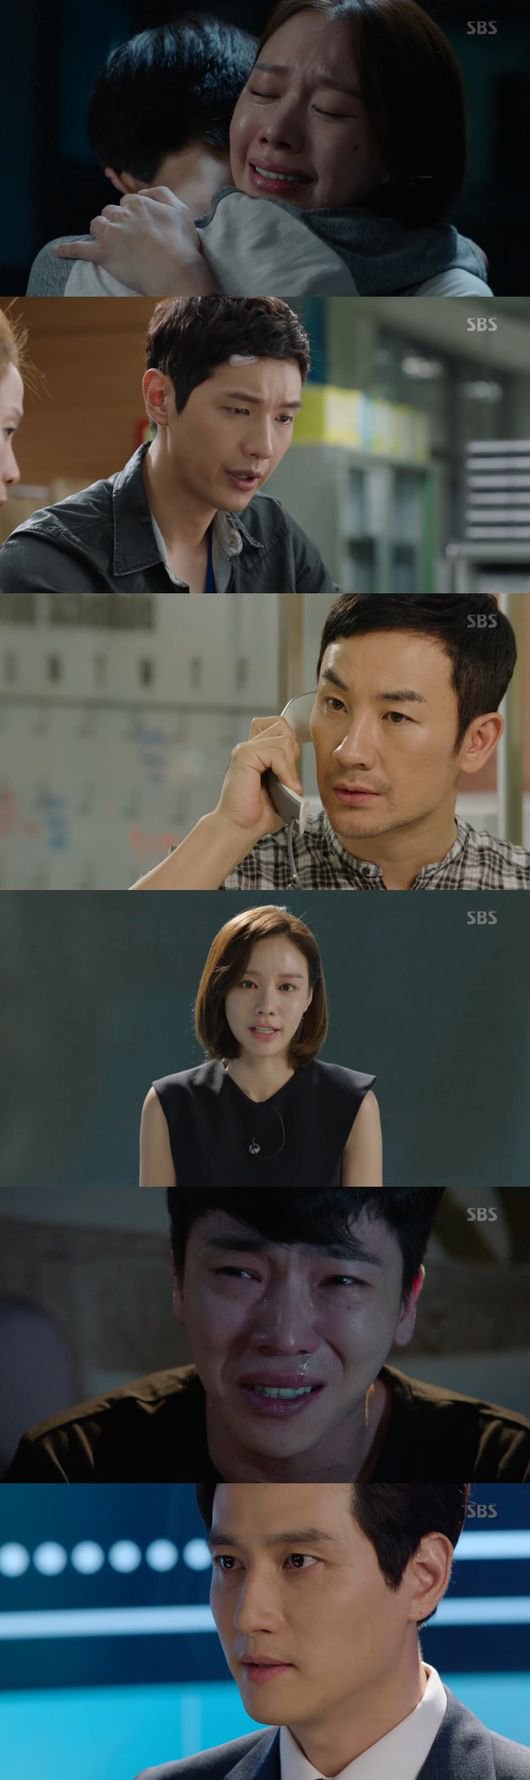 'Wanted' Park Hae-joon announces closure of the show, will Kim Ah-joong still be able to find her son?